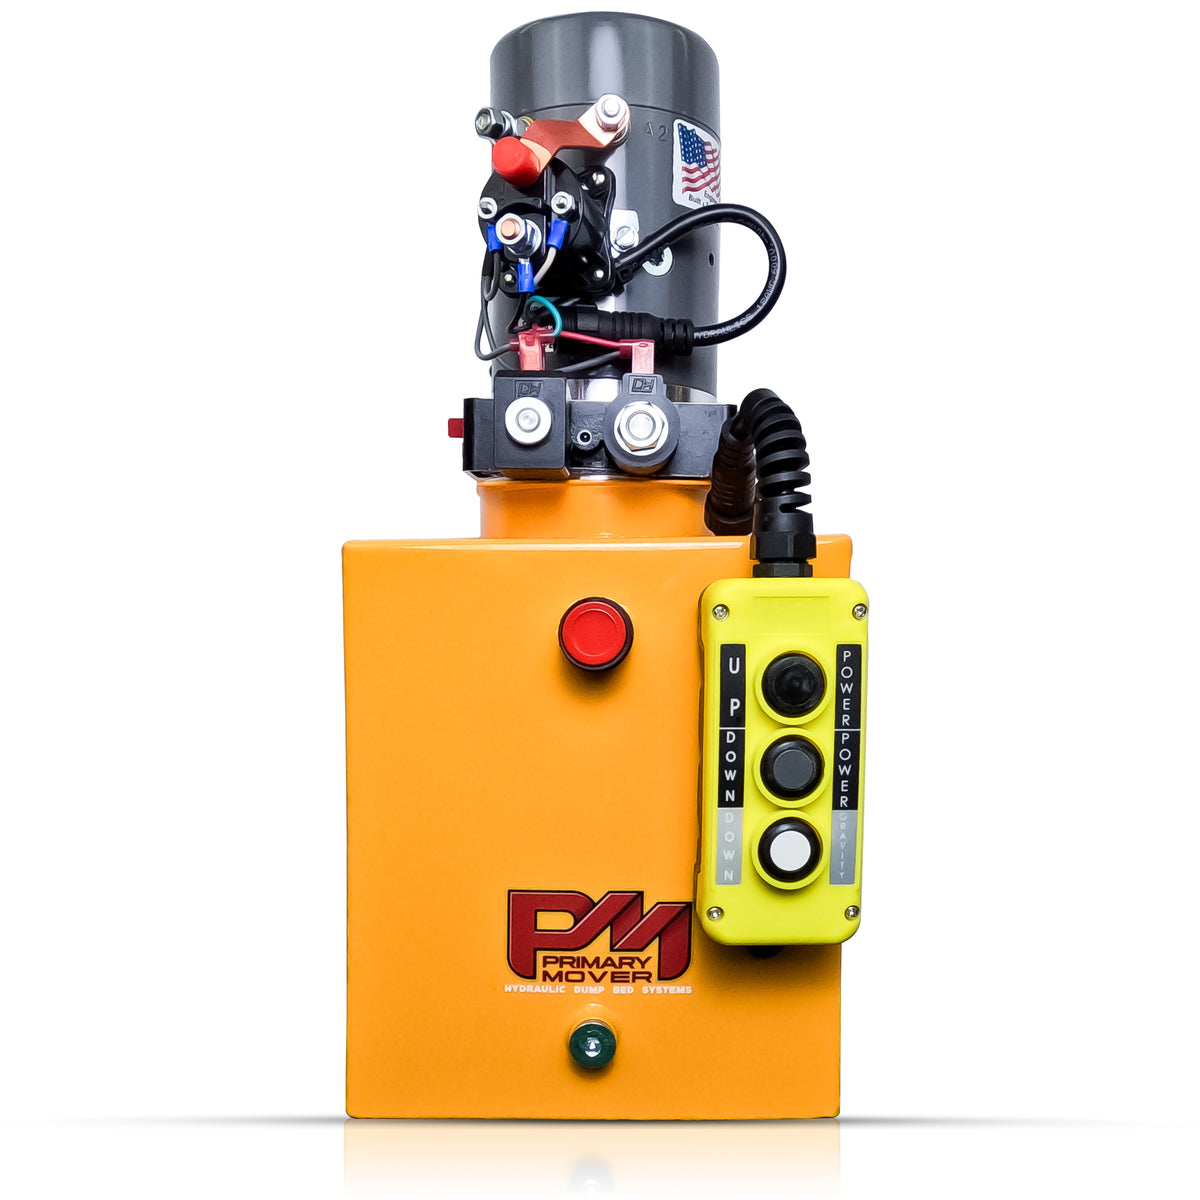 KTI 12V Double-Acting Hydraulic Pump with steel reservoir, featuring a compact design, yellow controller, and robust hydraulic system for efficient lifting and lowering operations.